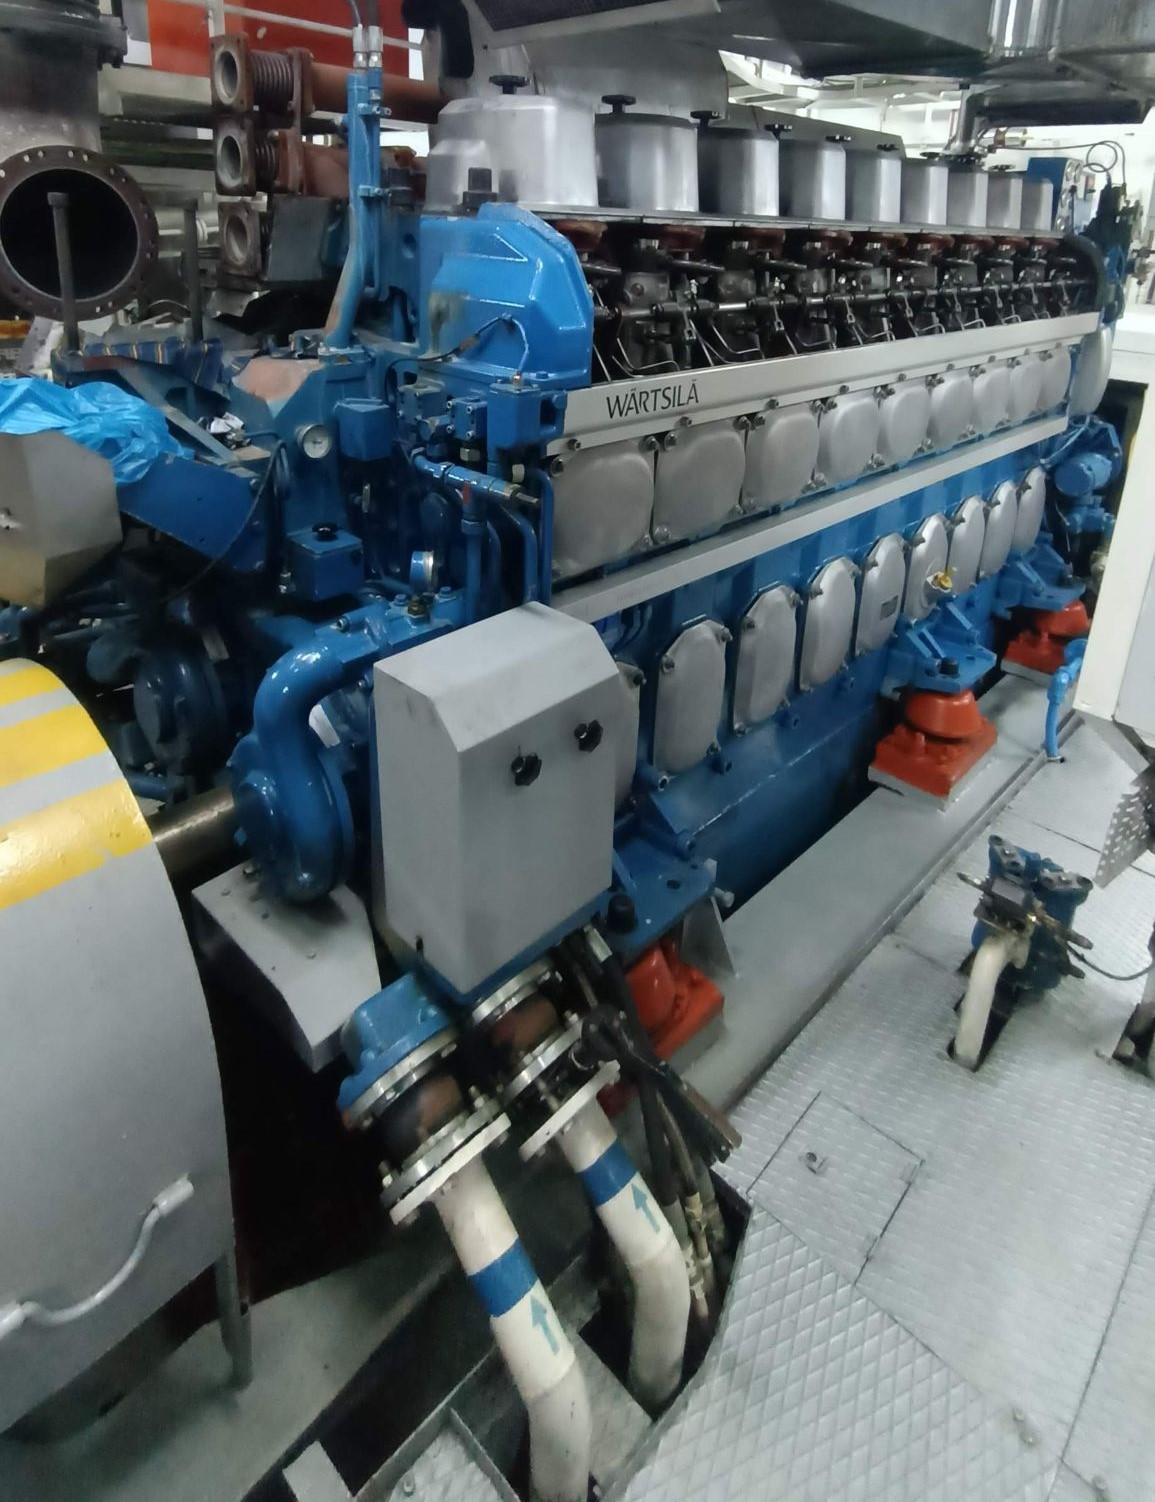 Wartsila 9L20 / Engine Cooling System, Motor Coupling, Injector Repair / Vessel NAZMI BEY / CANAKKALE TR